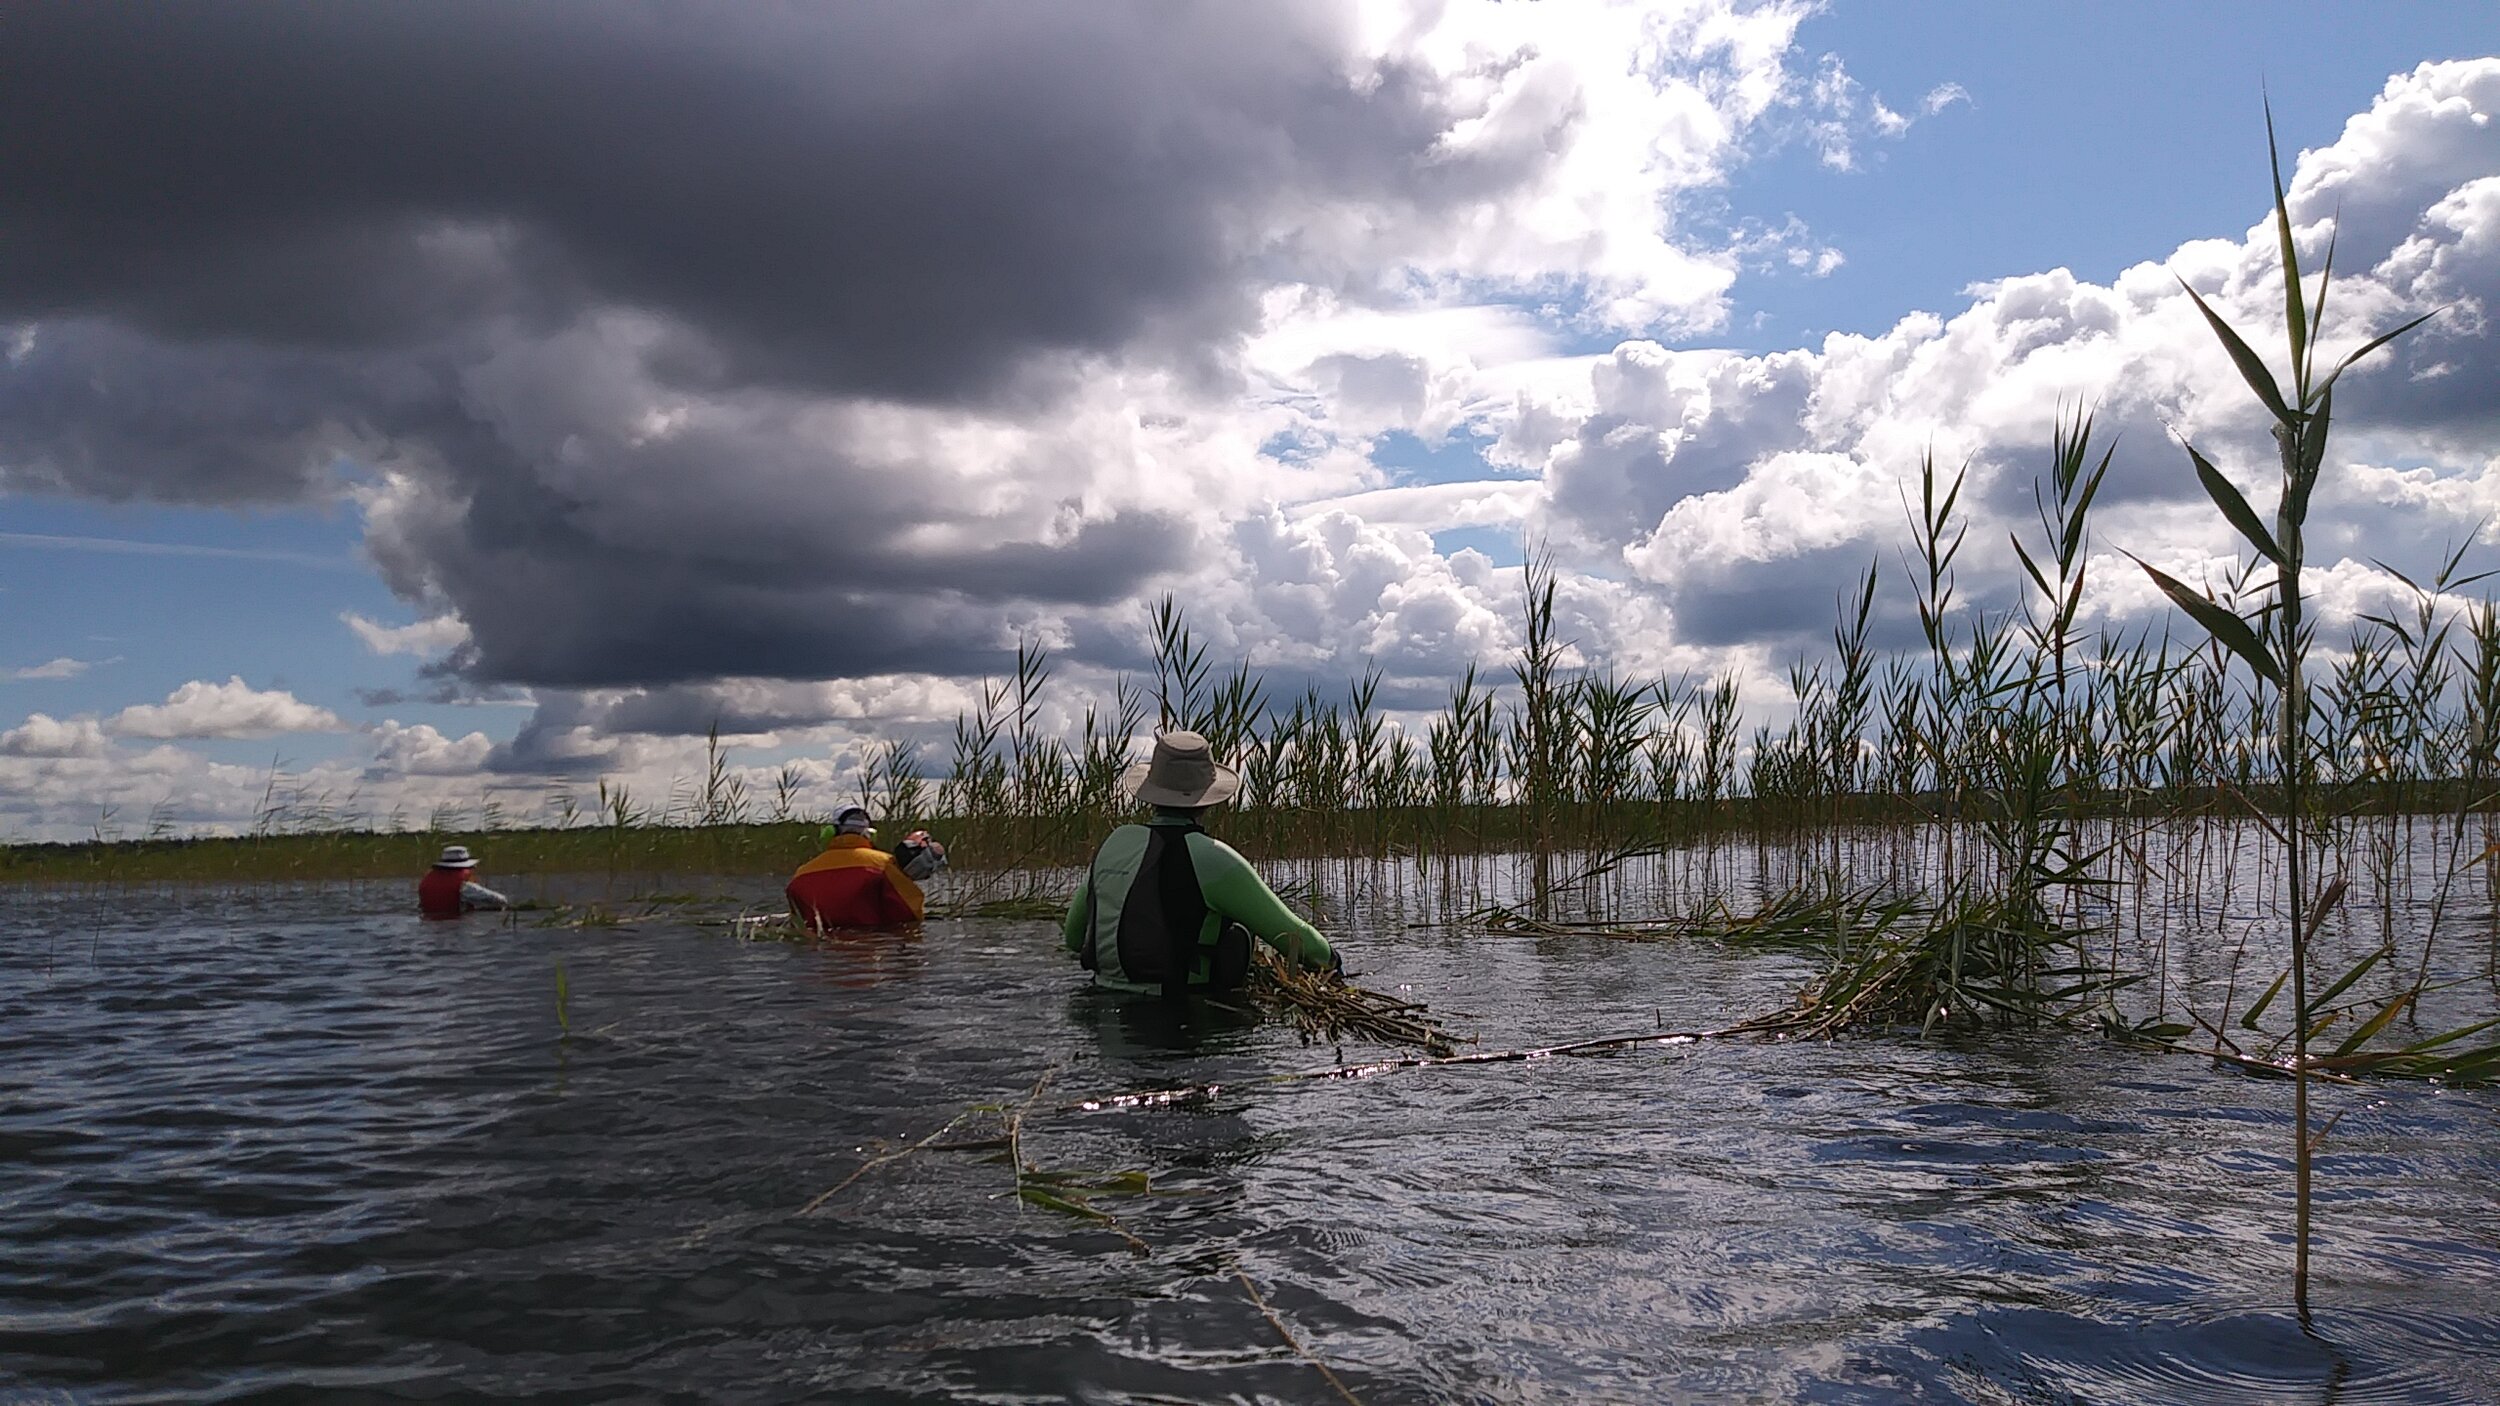 Some of the awesome OFIPCG volunteers hauling Phragmites out of the water.